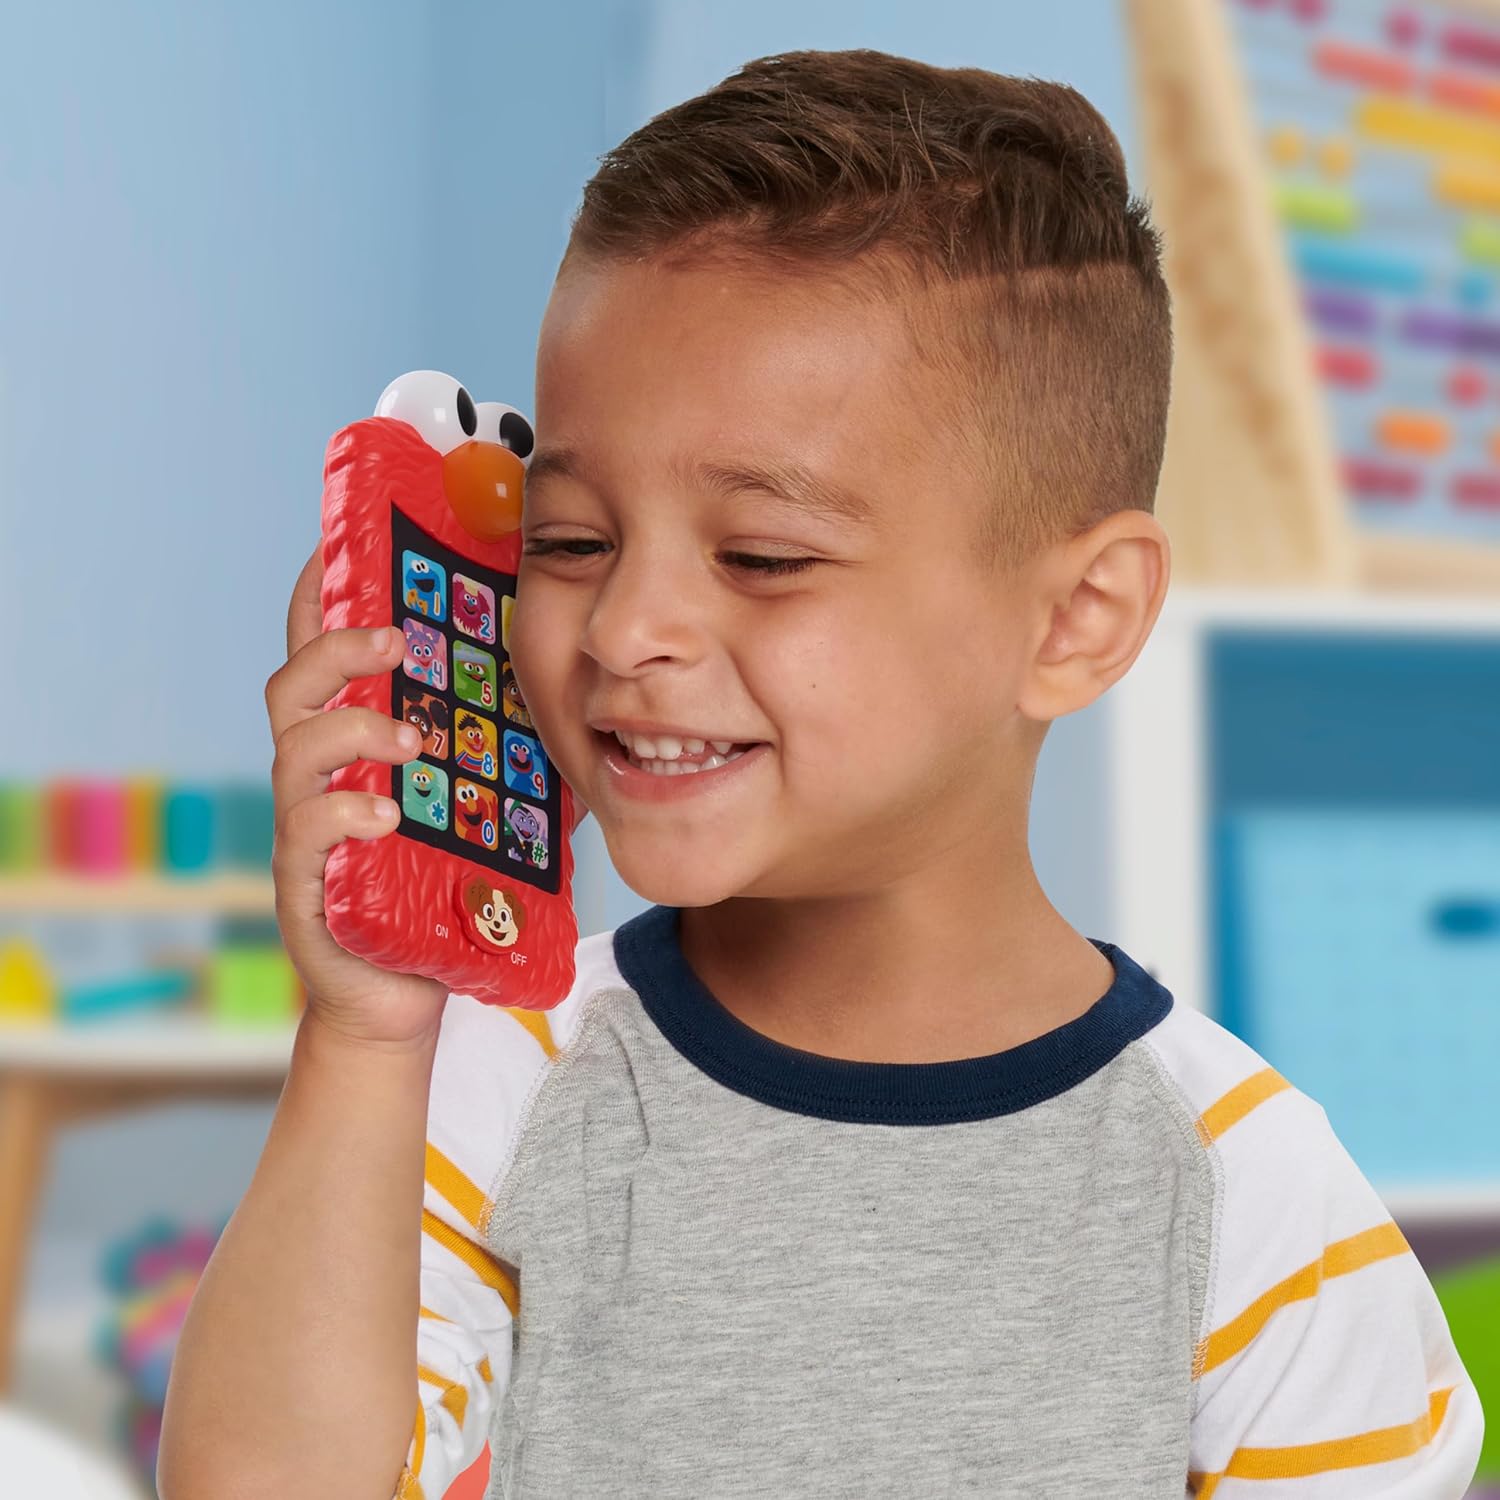 Just Play SESAME STREET Learn with Elmo Pretend Play Phone, Learning and Education, Officially Licensed Kids Toys for Ages 2 Up